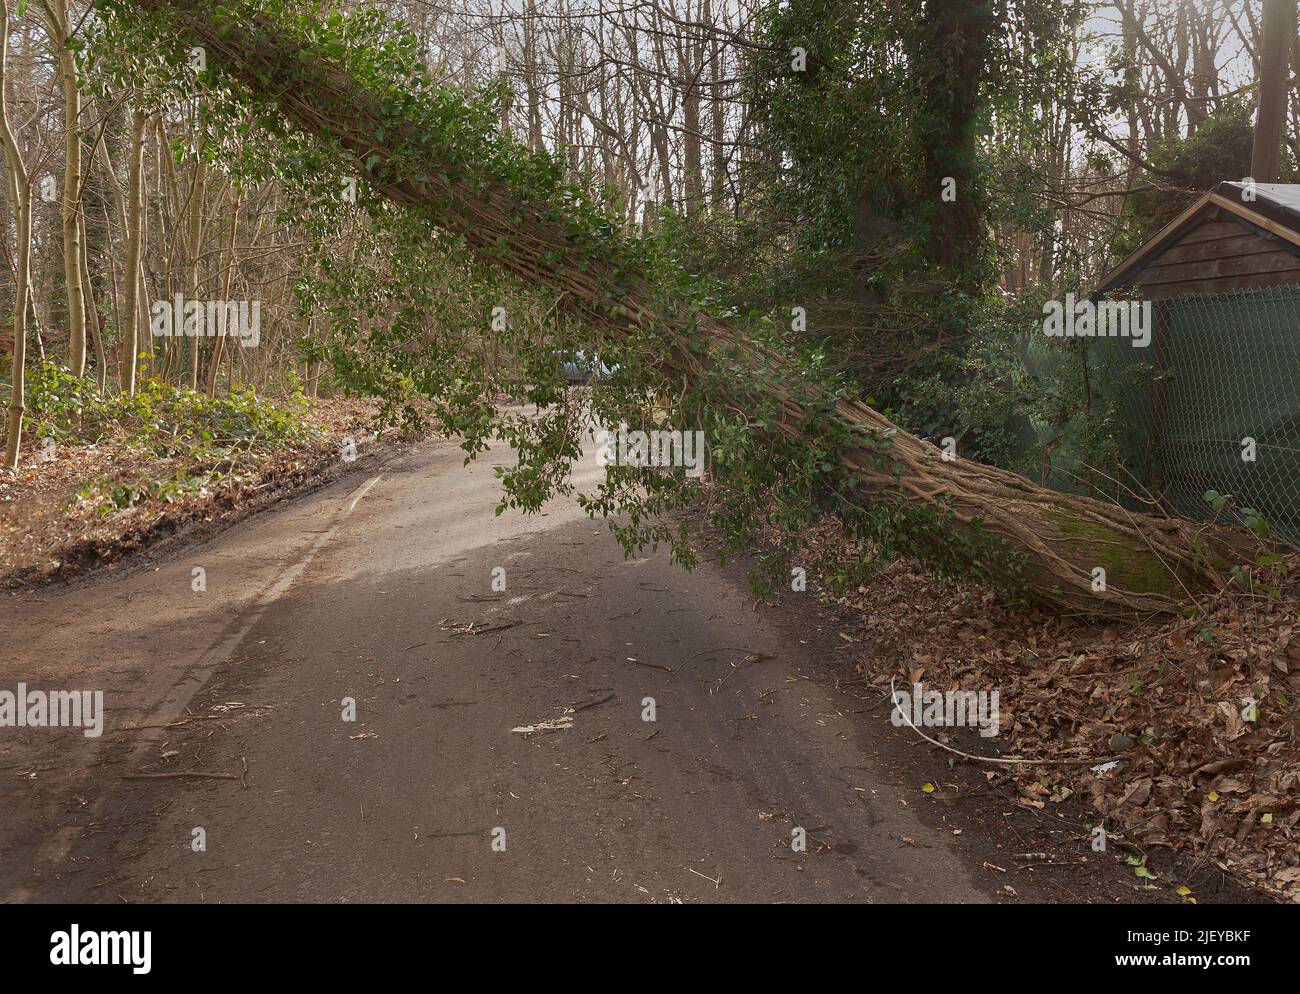 Damage and disruption from storm Eunice where precariously balanced ash tree suspended on power line in narrow country lane immediately after storm Stock Photo